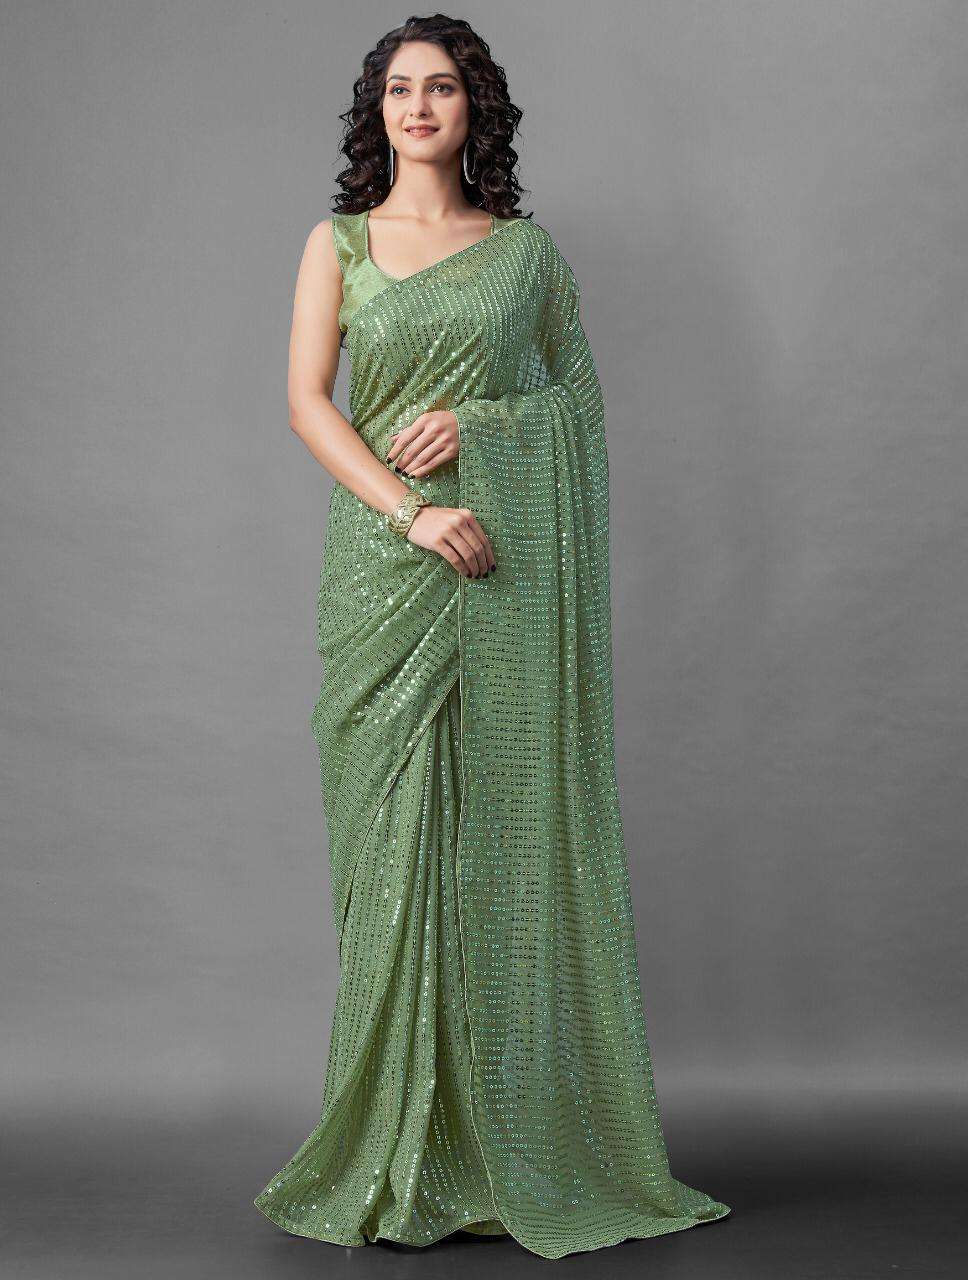 GREEN GEORGETTE PARTY WEAR SAREE COLLECTION